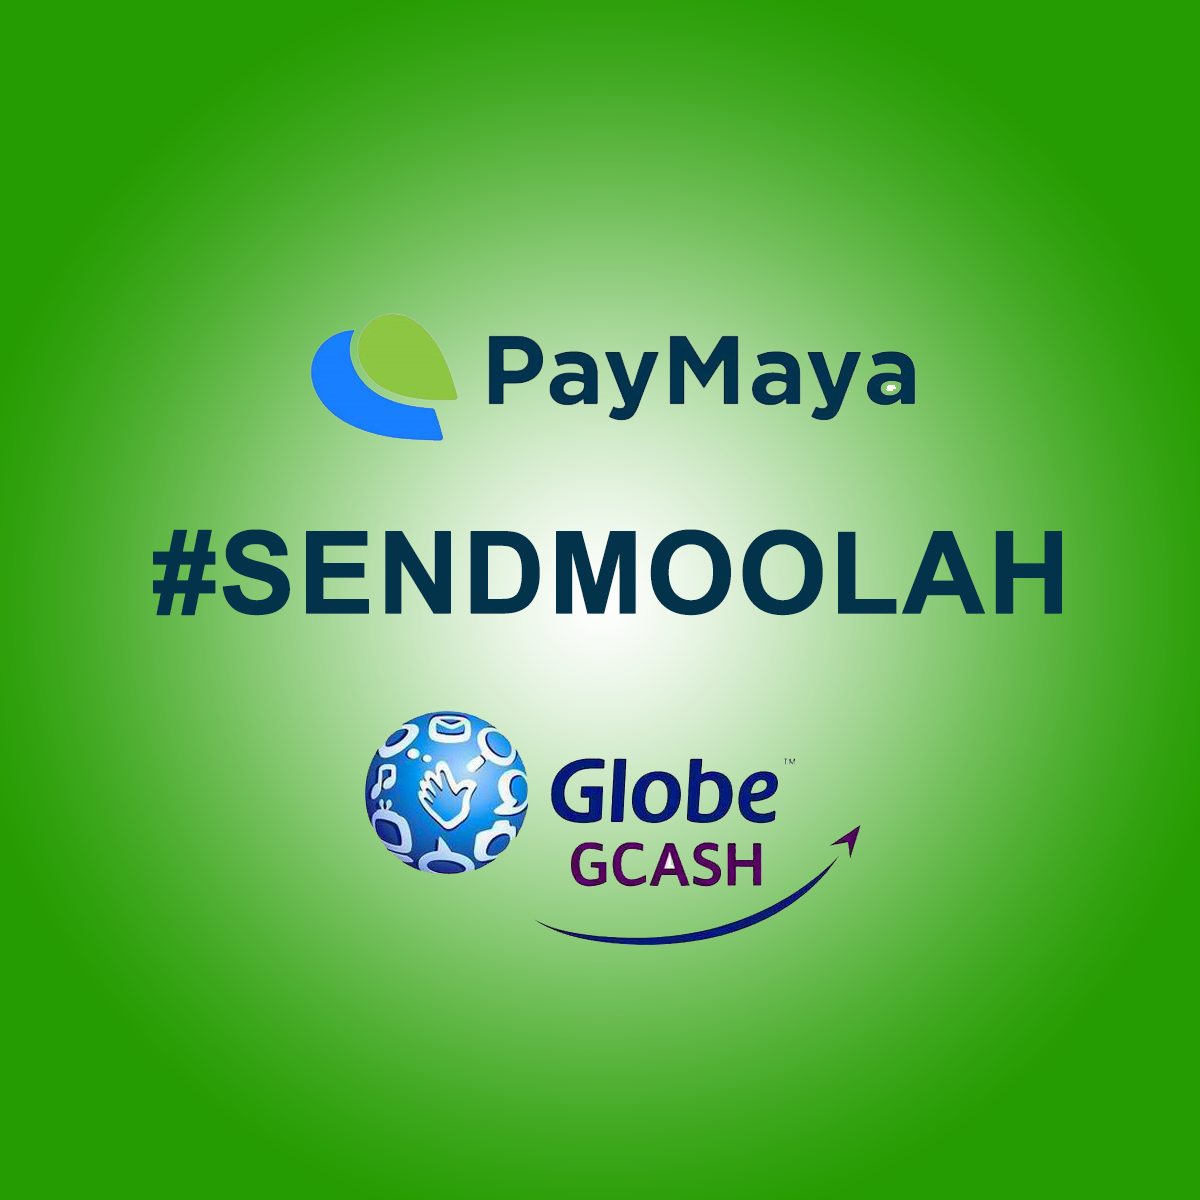 PayMaya Makes Money Services More Accessible to Filipinos, Announces Interoperability with GCash